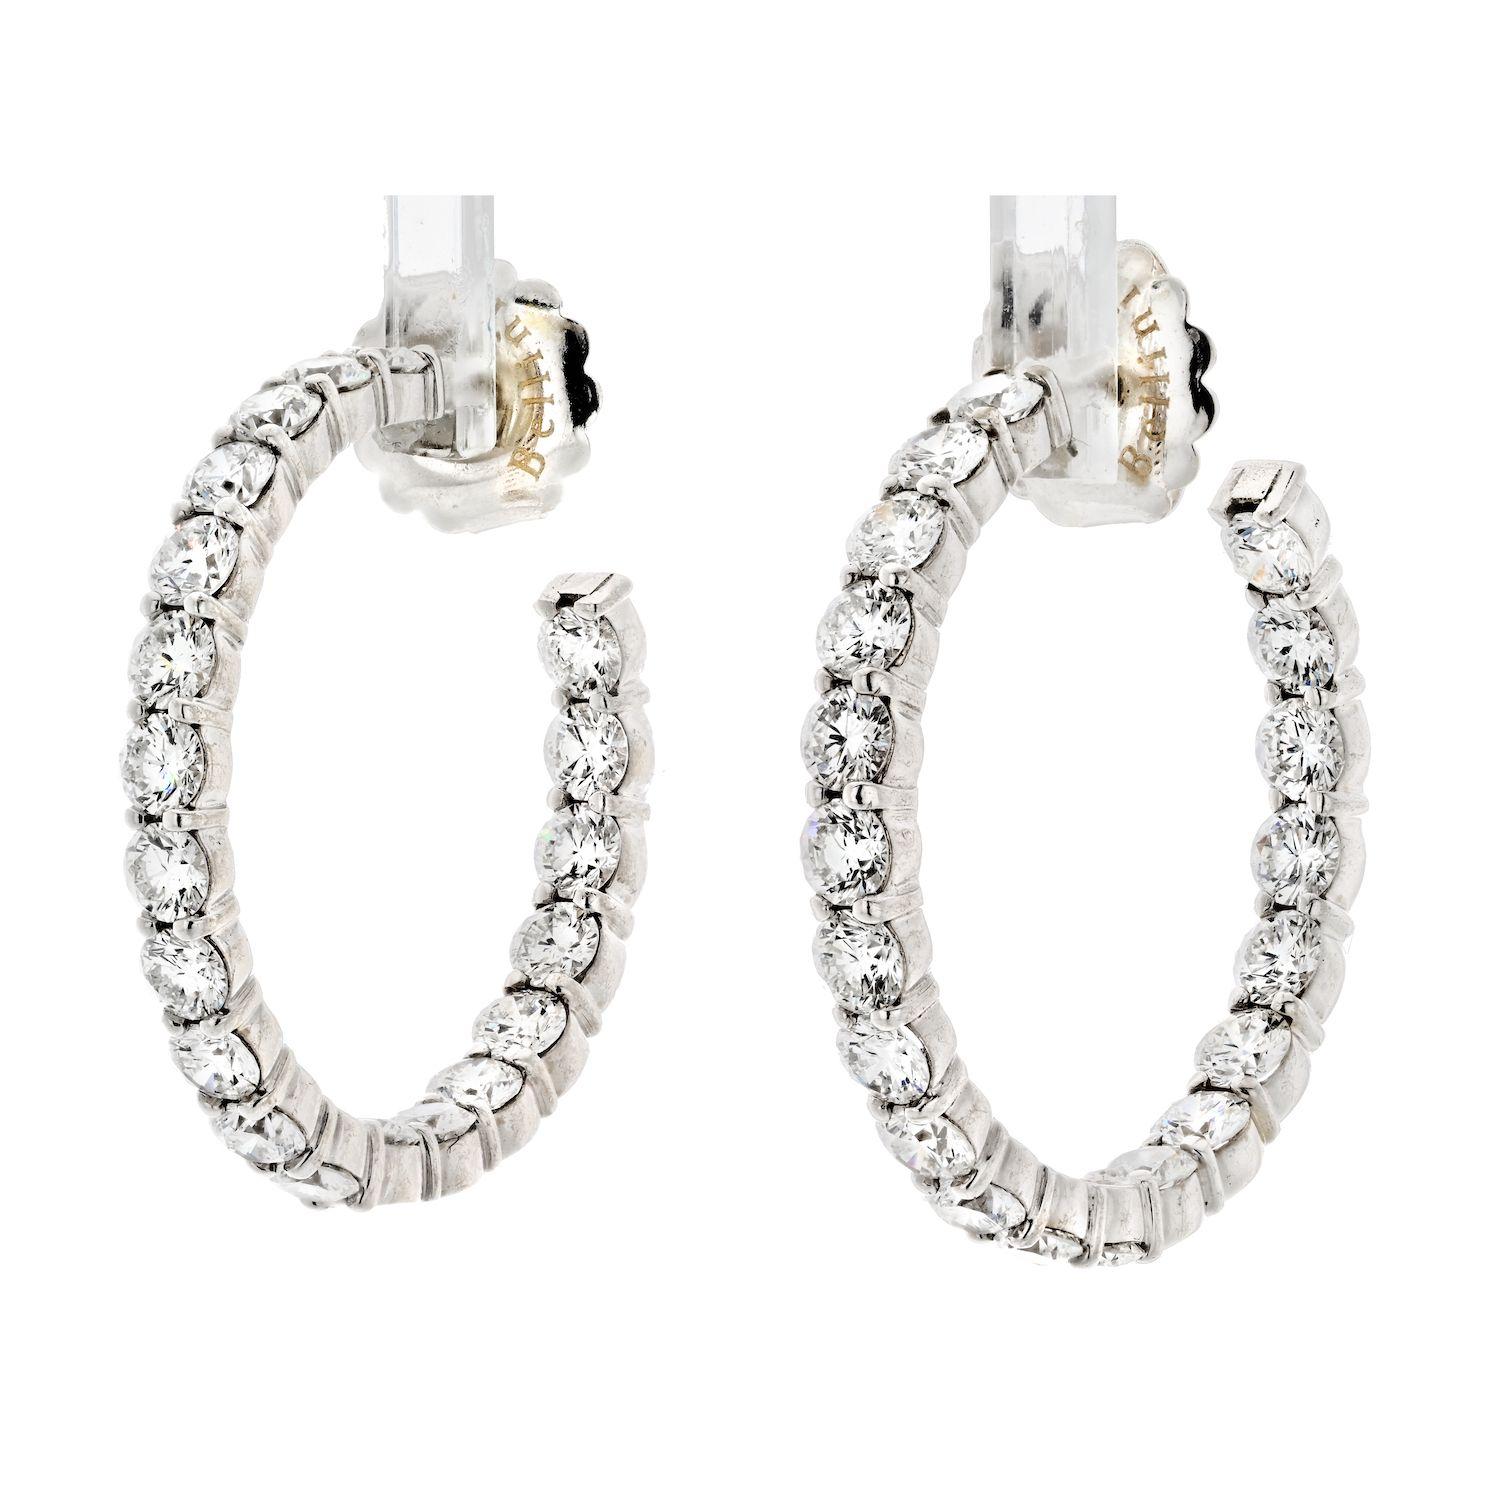 The 6.00 cttw 18K White Gold Round Cut Diamond Hoop Earrings are a dazzling and elegant addition to any jewelry collection. These earrings feature 18K white gold hoops that are studded with round cut diamonds, which give them a luxurious and